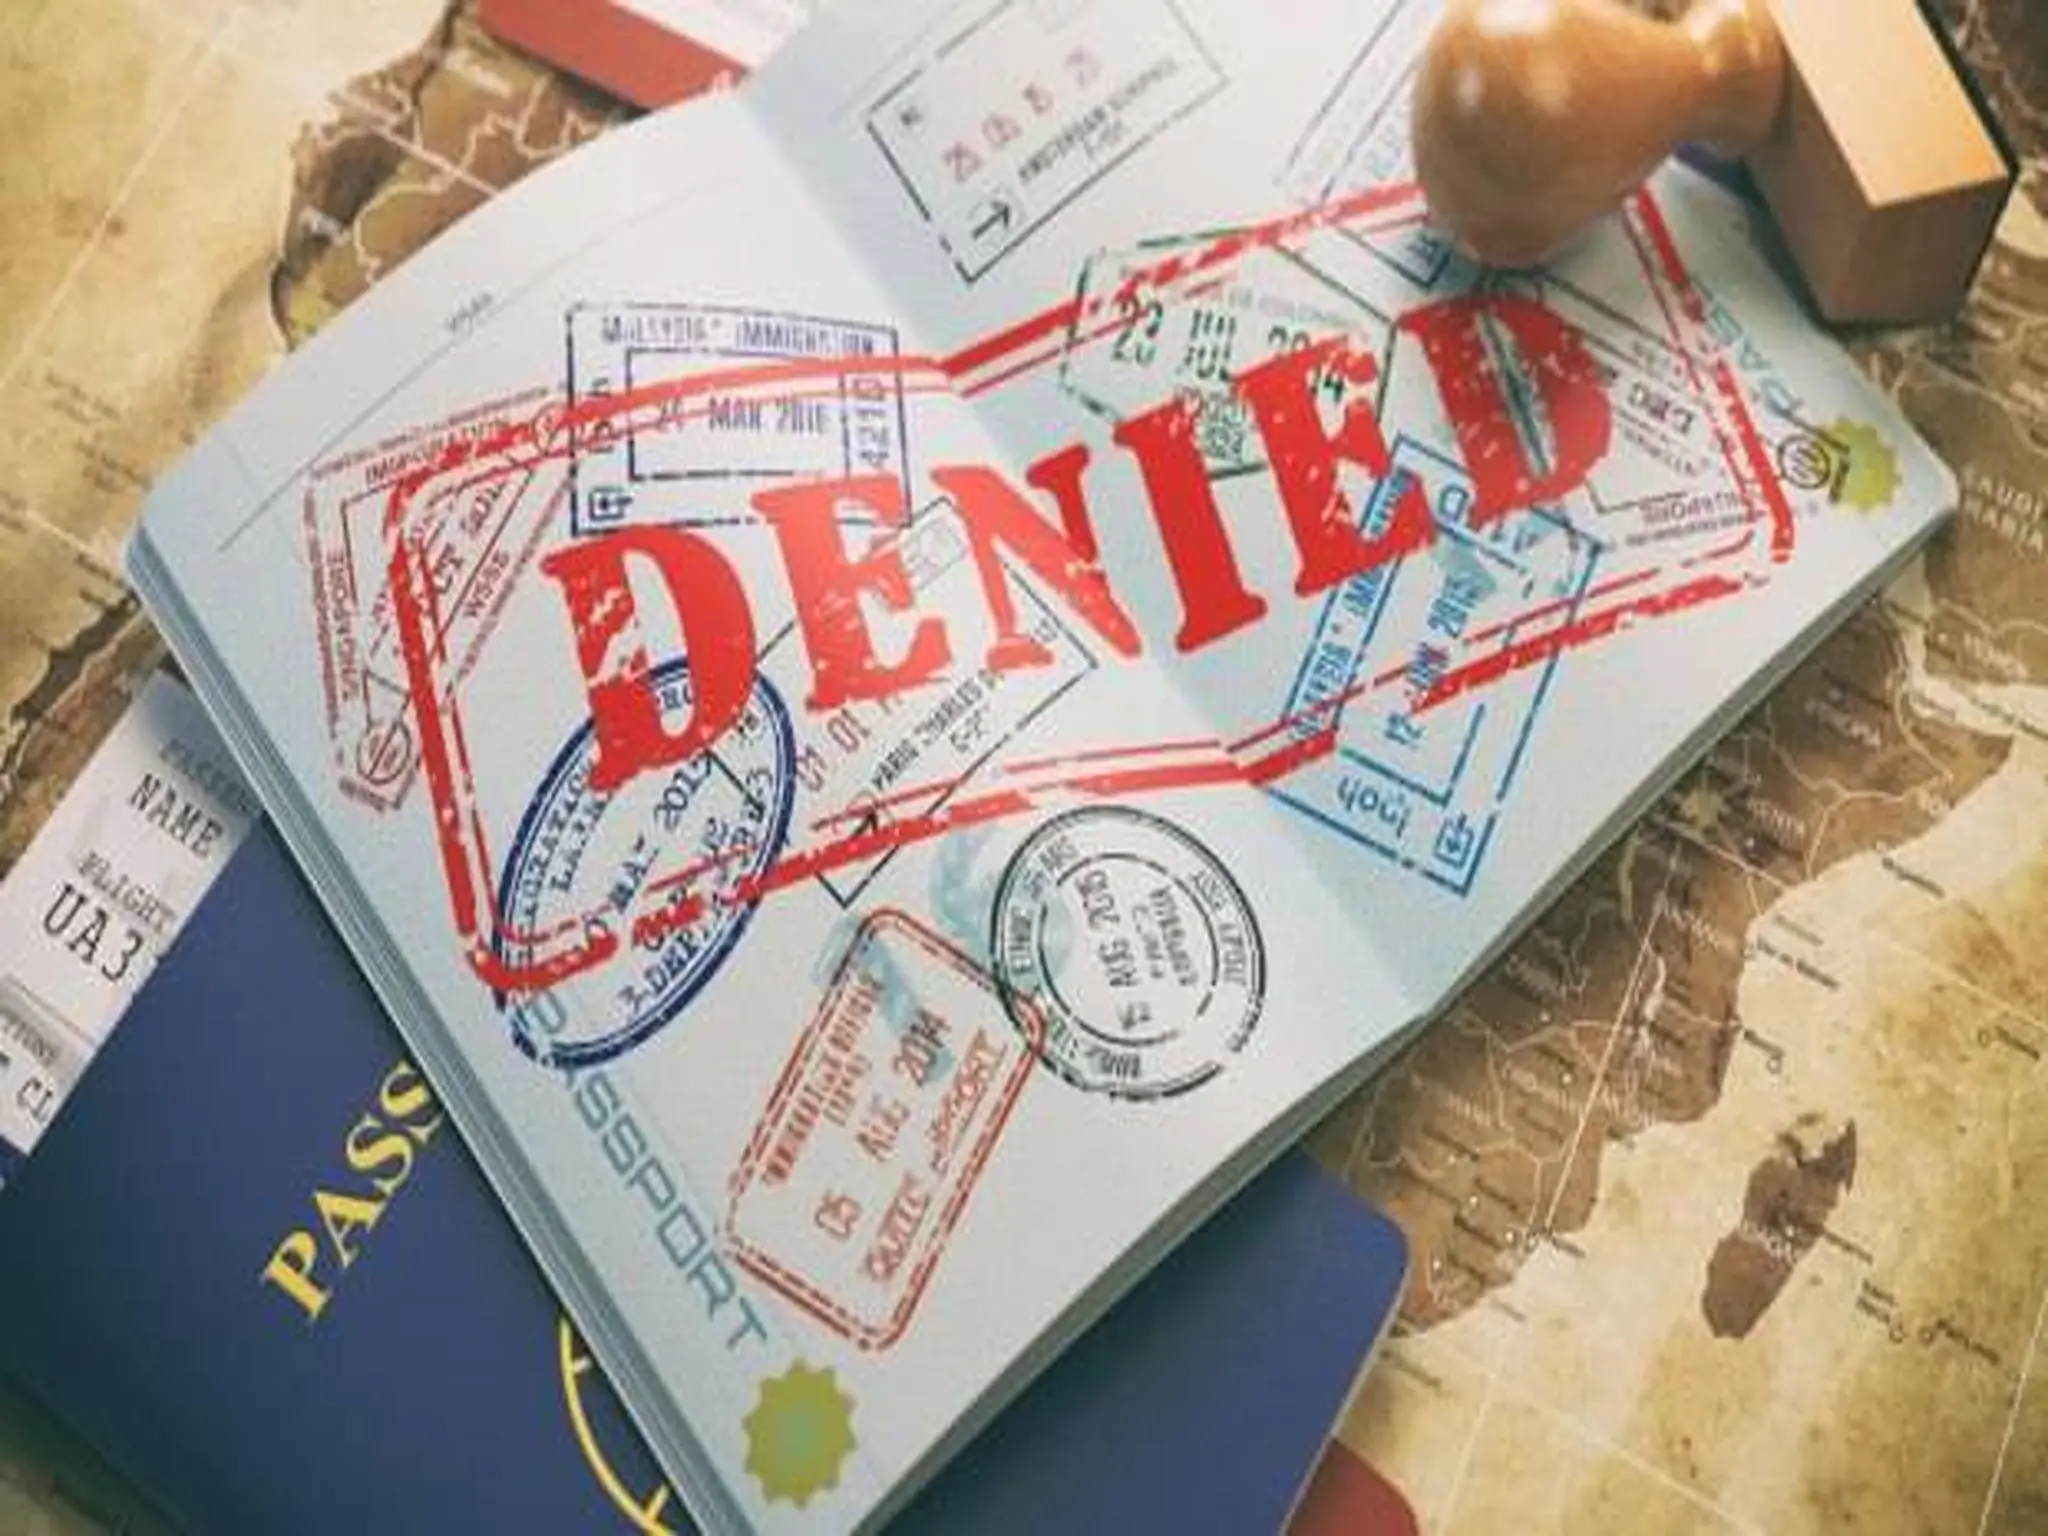 How Can I Know If I Have Been Re-entry Banned from Australia?